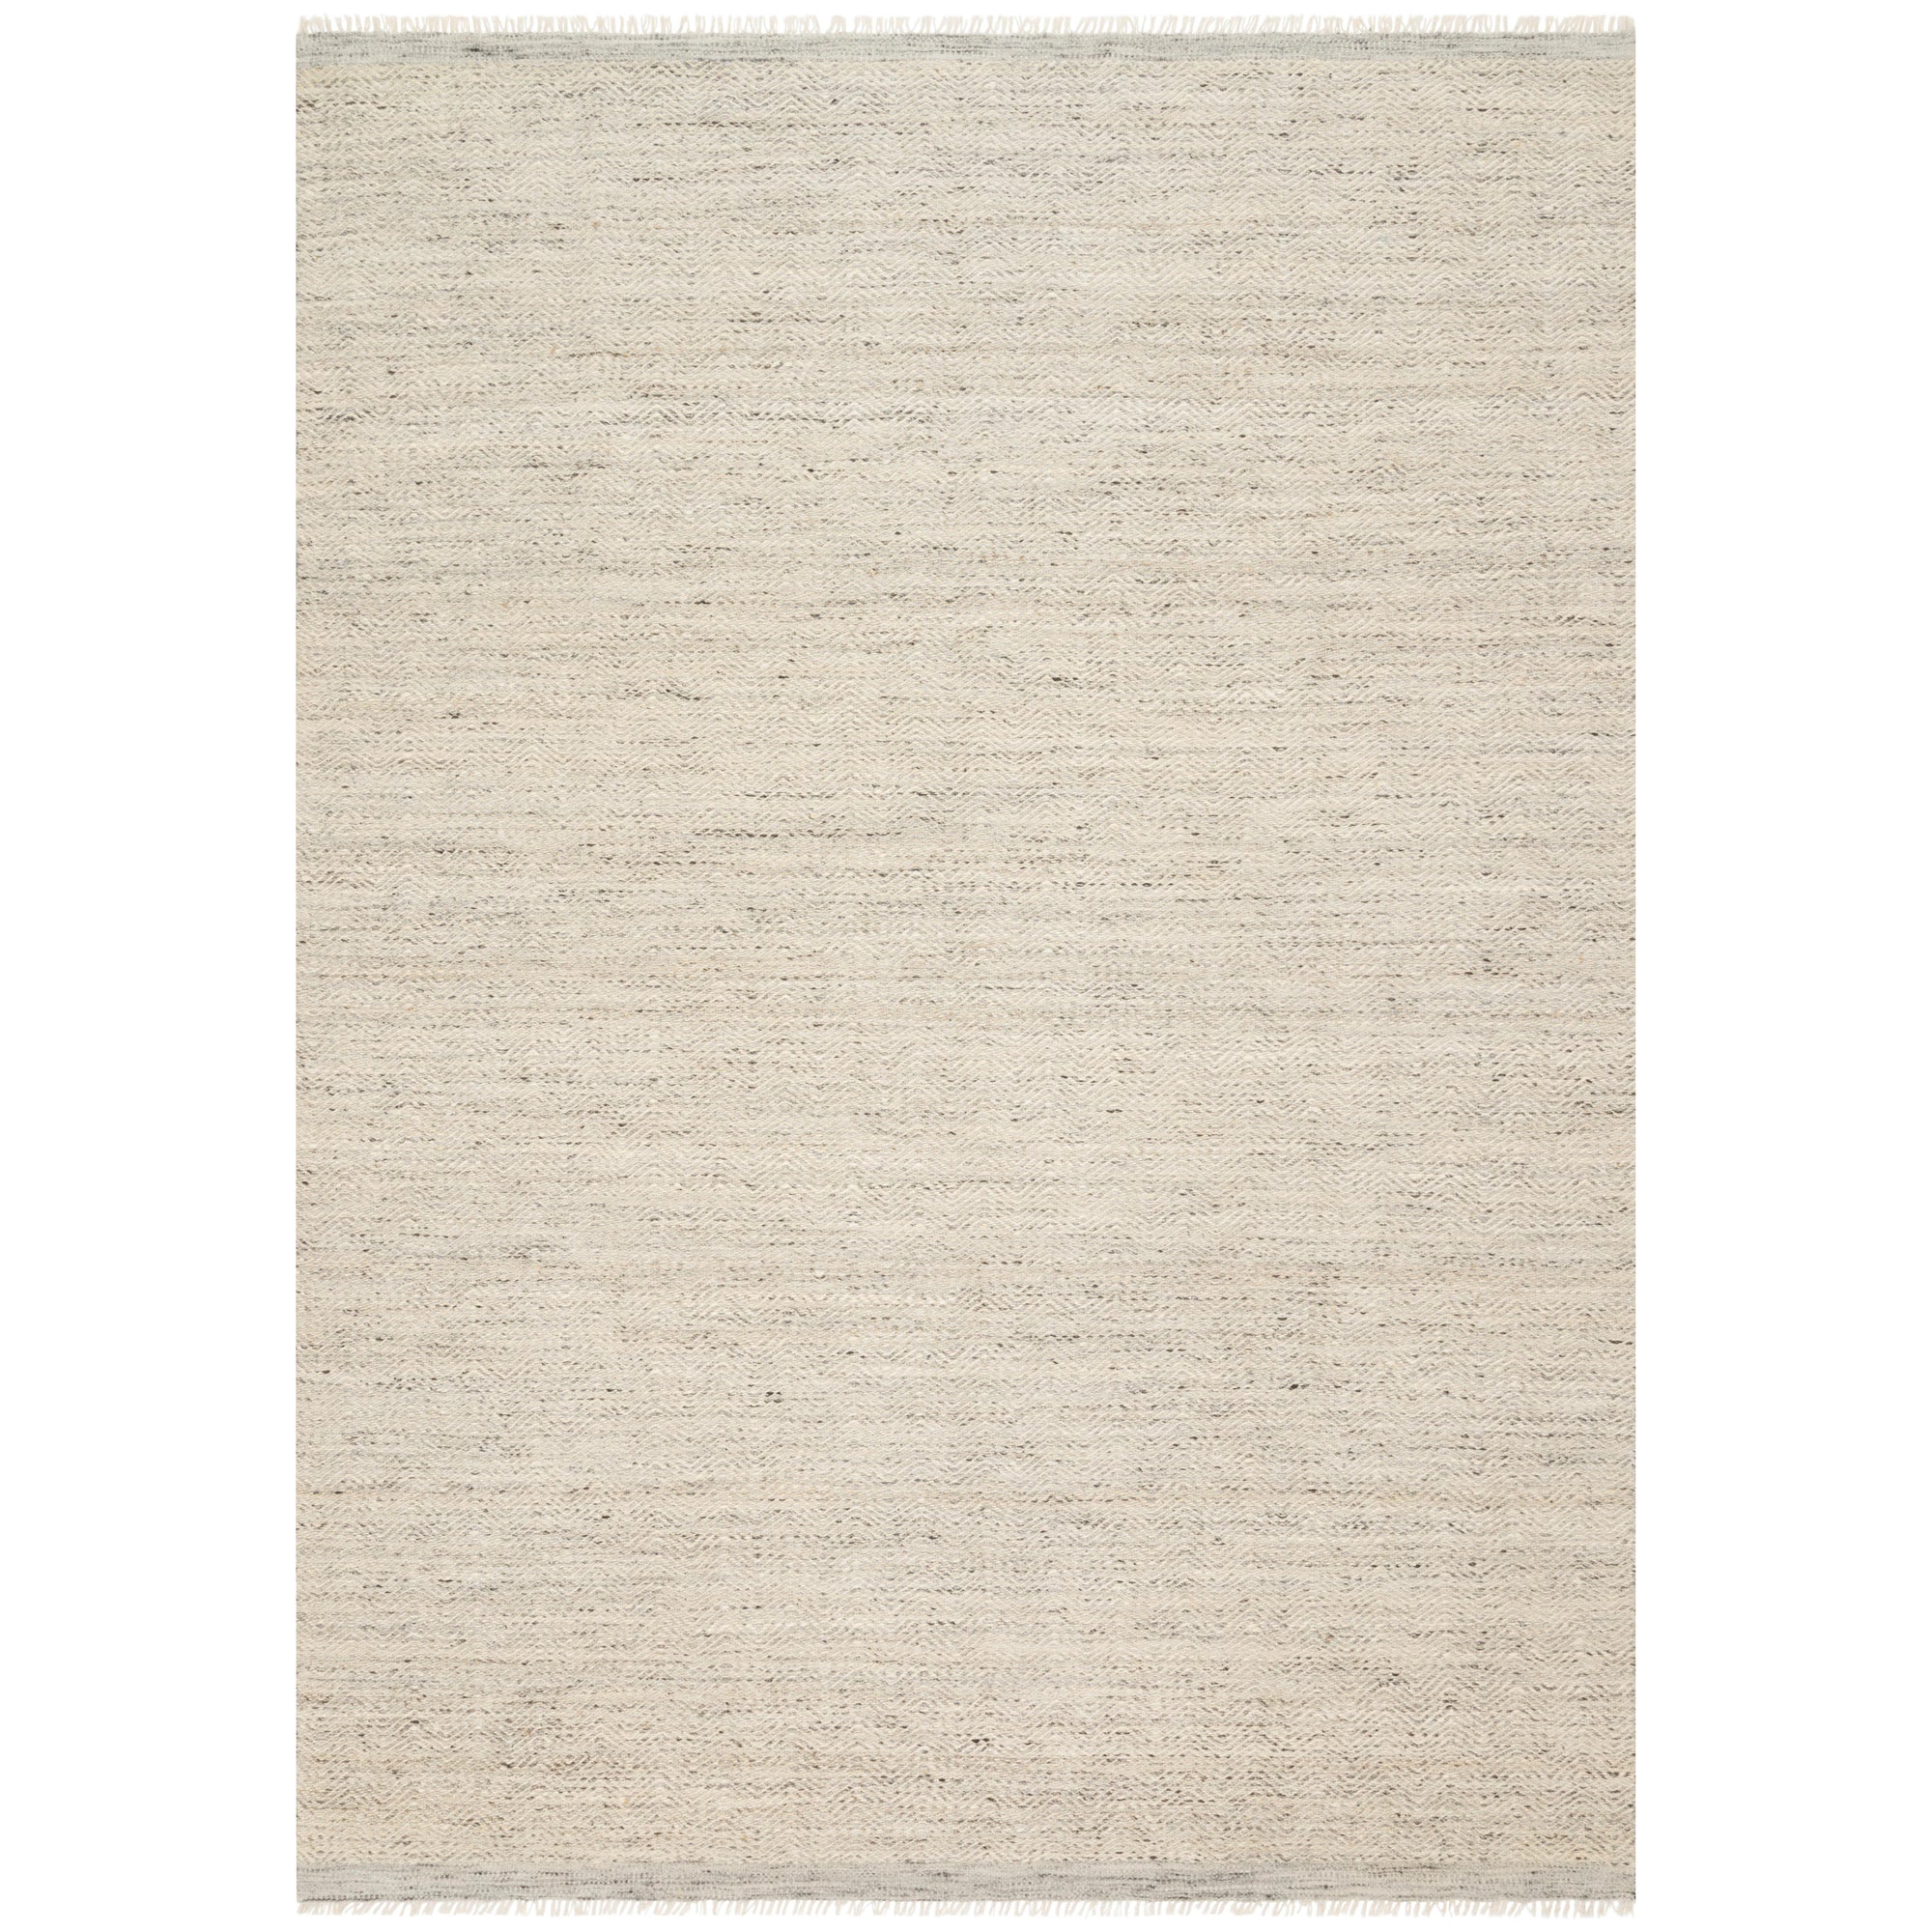 Rugs by Roo Loloi Omen Mist Area Rug in size 3' 6" x 5' 6"